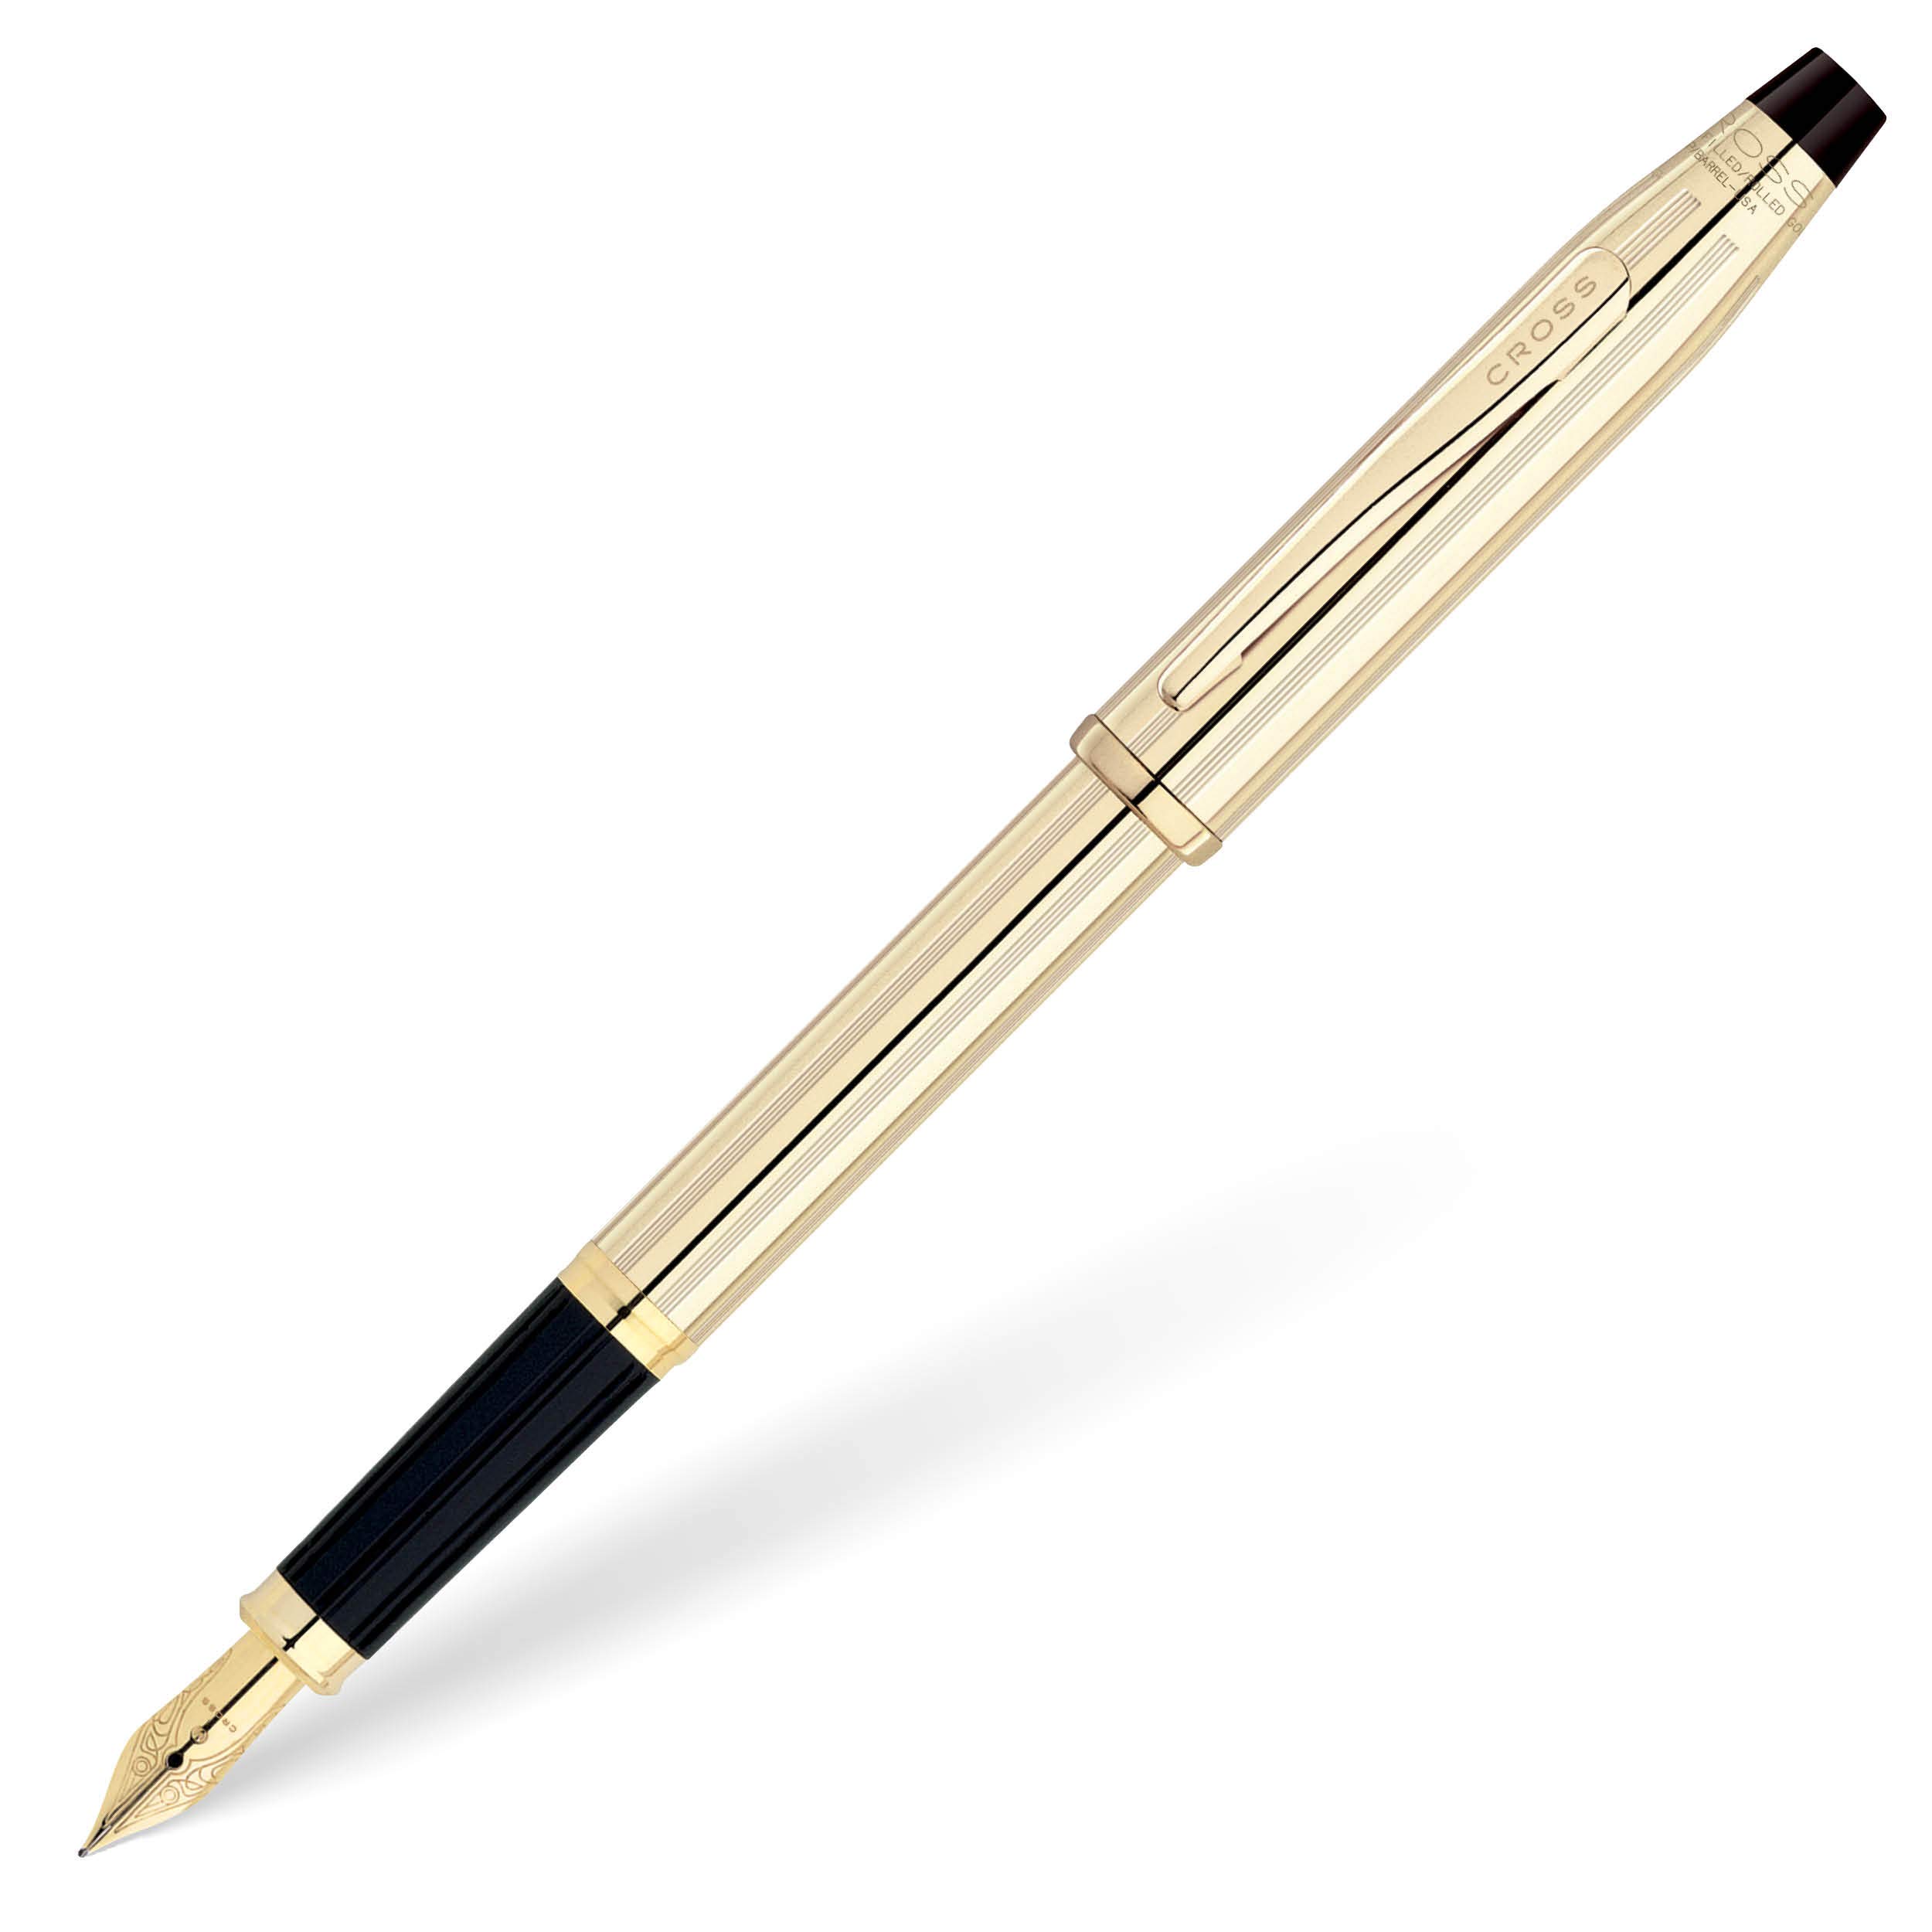 Cross Century II 10KT Gold-Filled (Rolled Gold) Fountain Pen with 18KT Gold Fine Nib